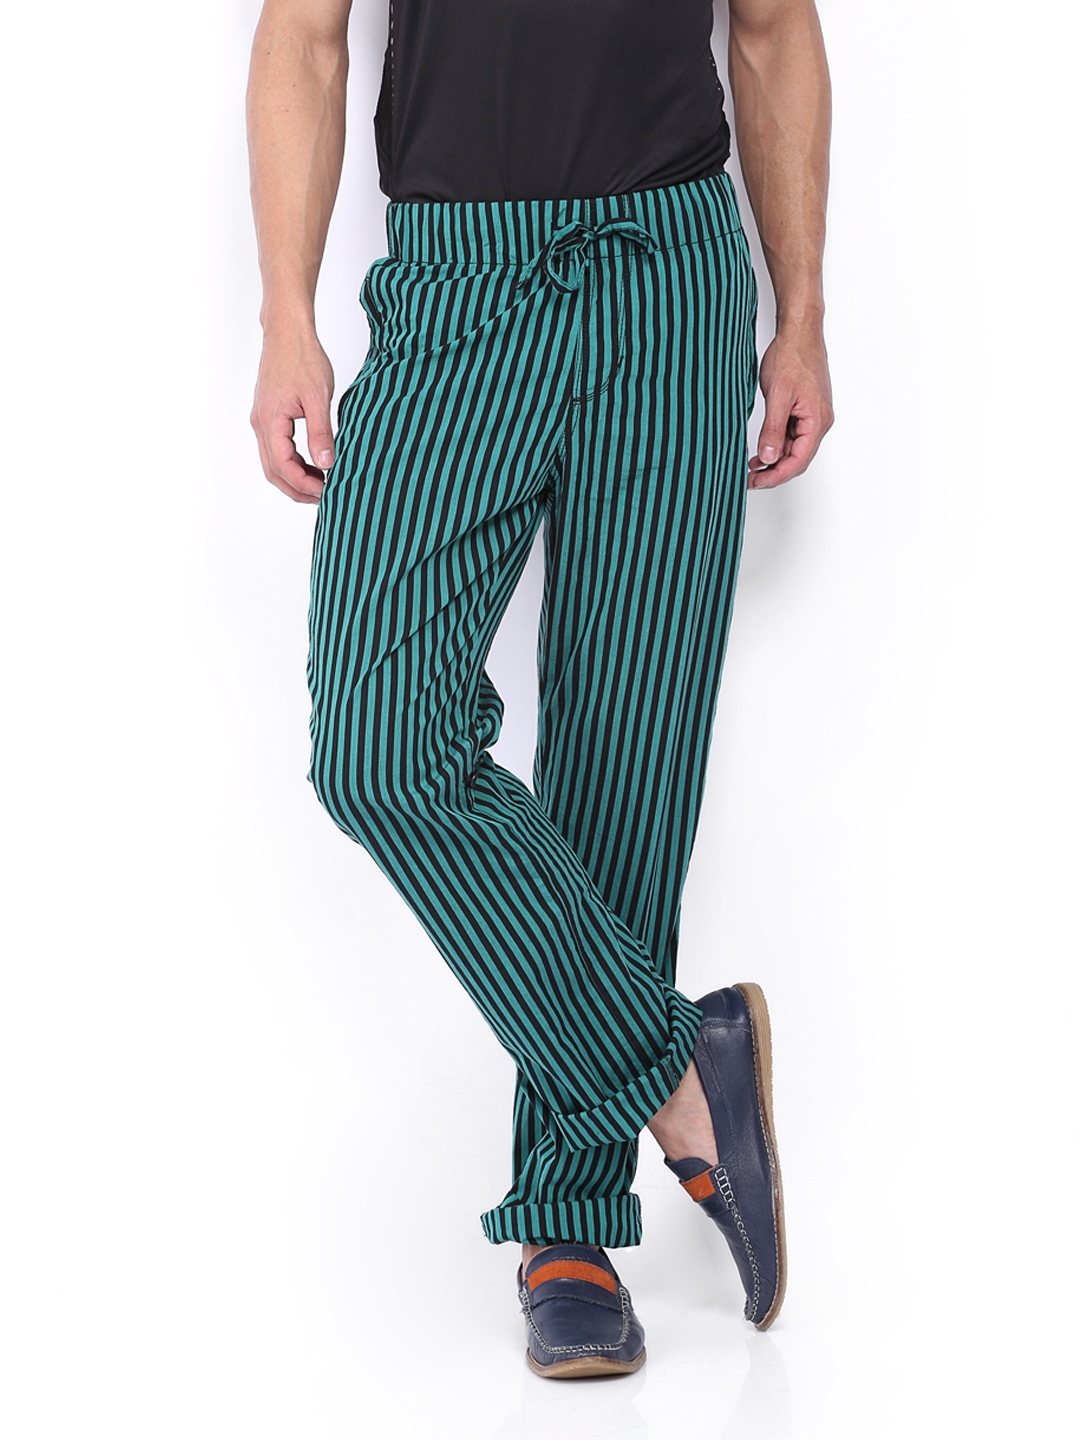 green and black striped pants